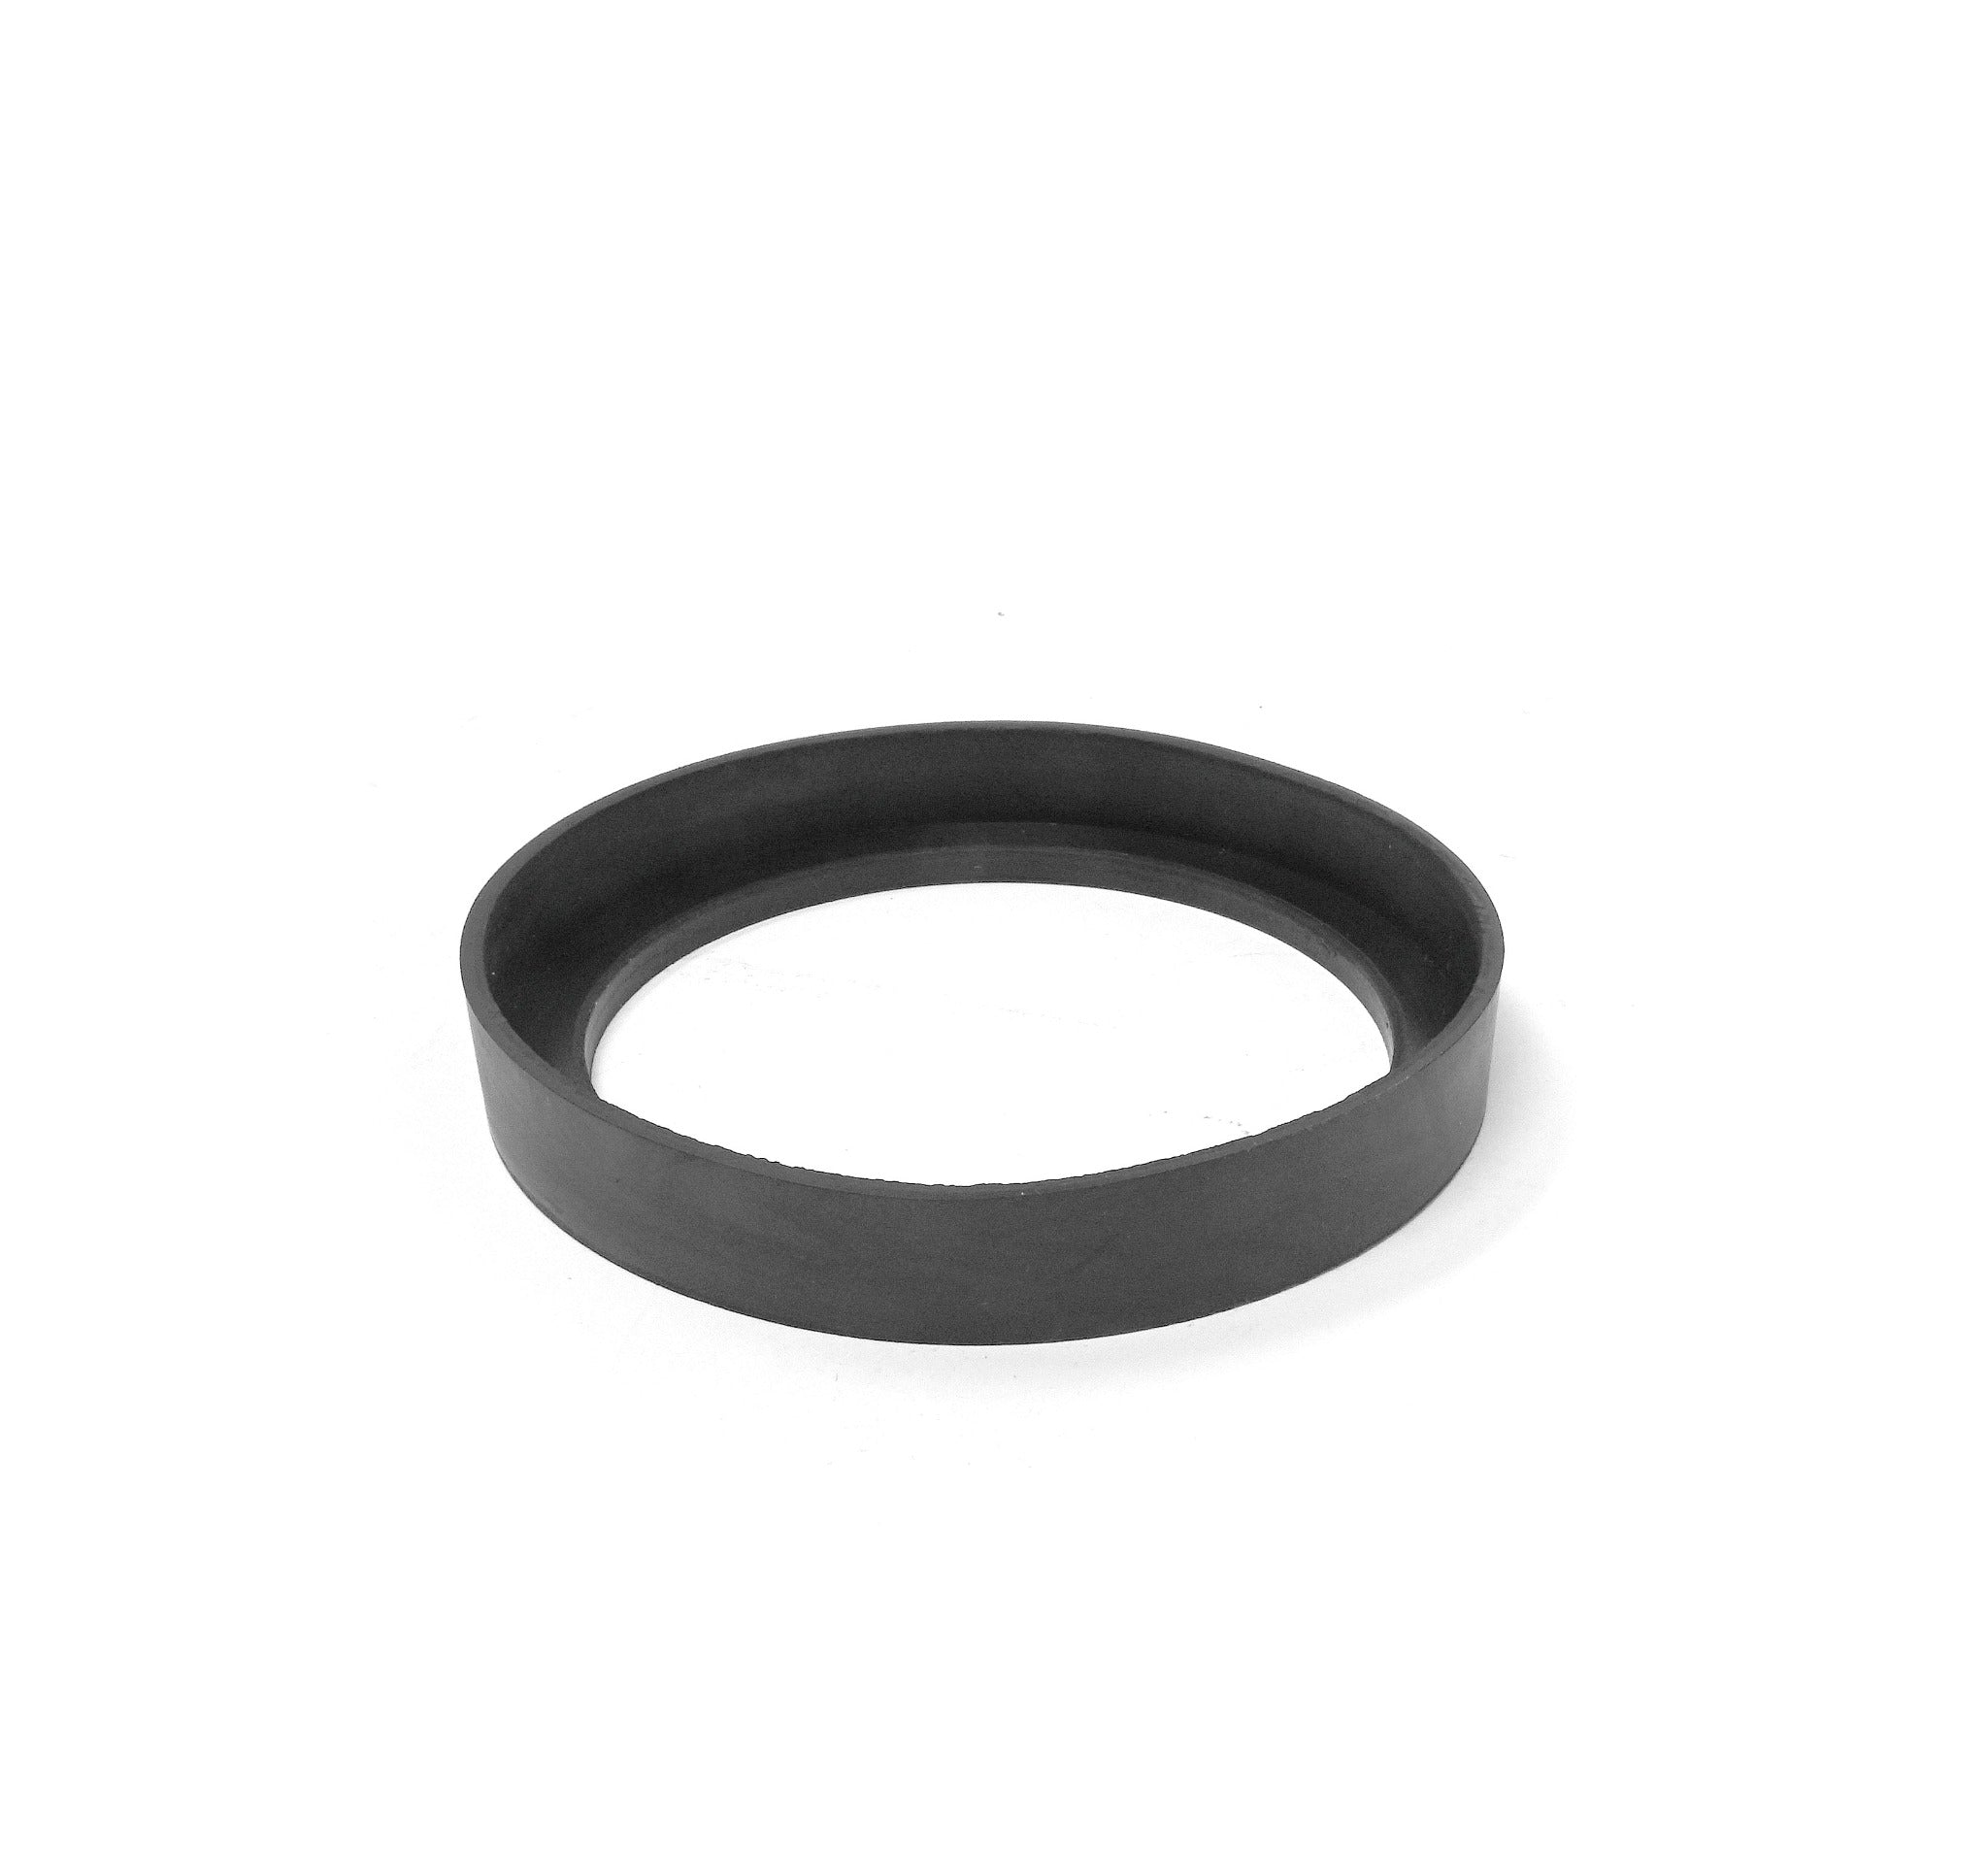 Hunter Rubber Ring for Balancer Cup 4.5"